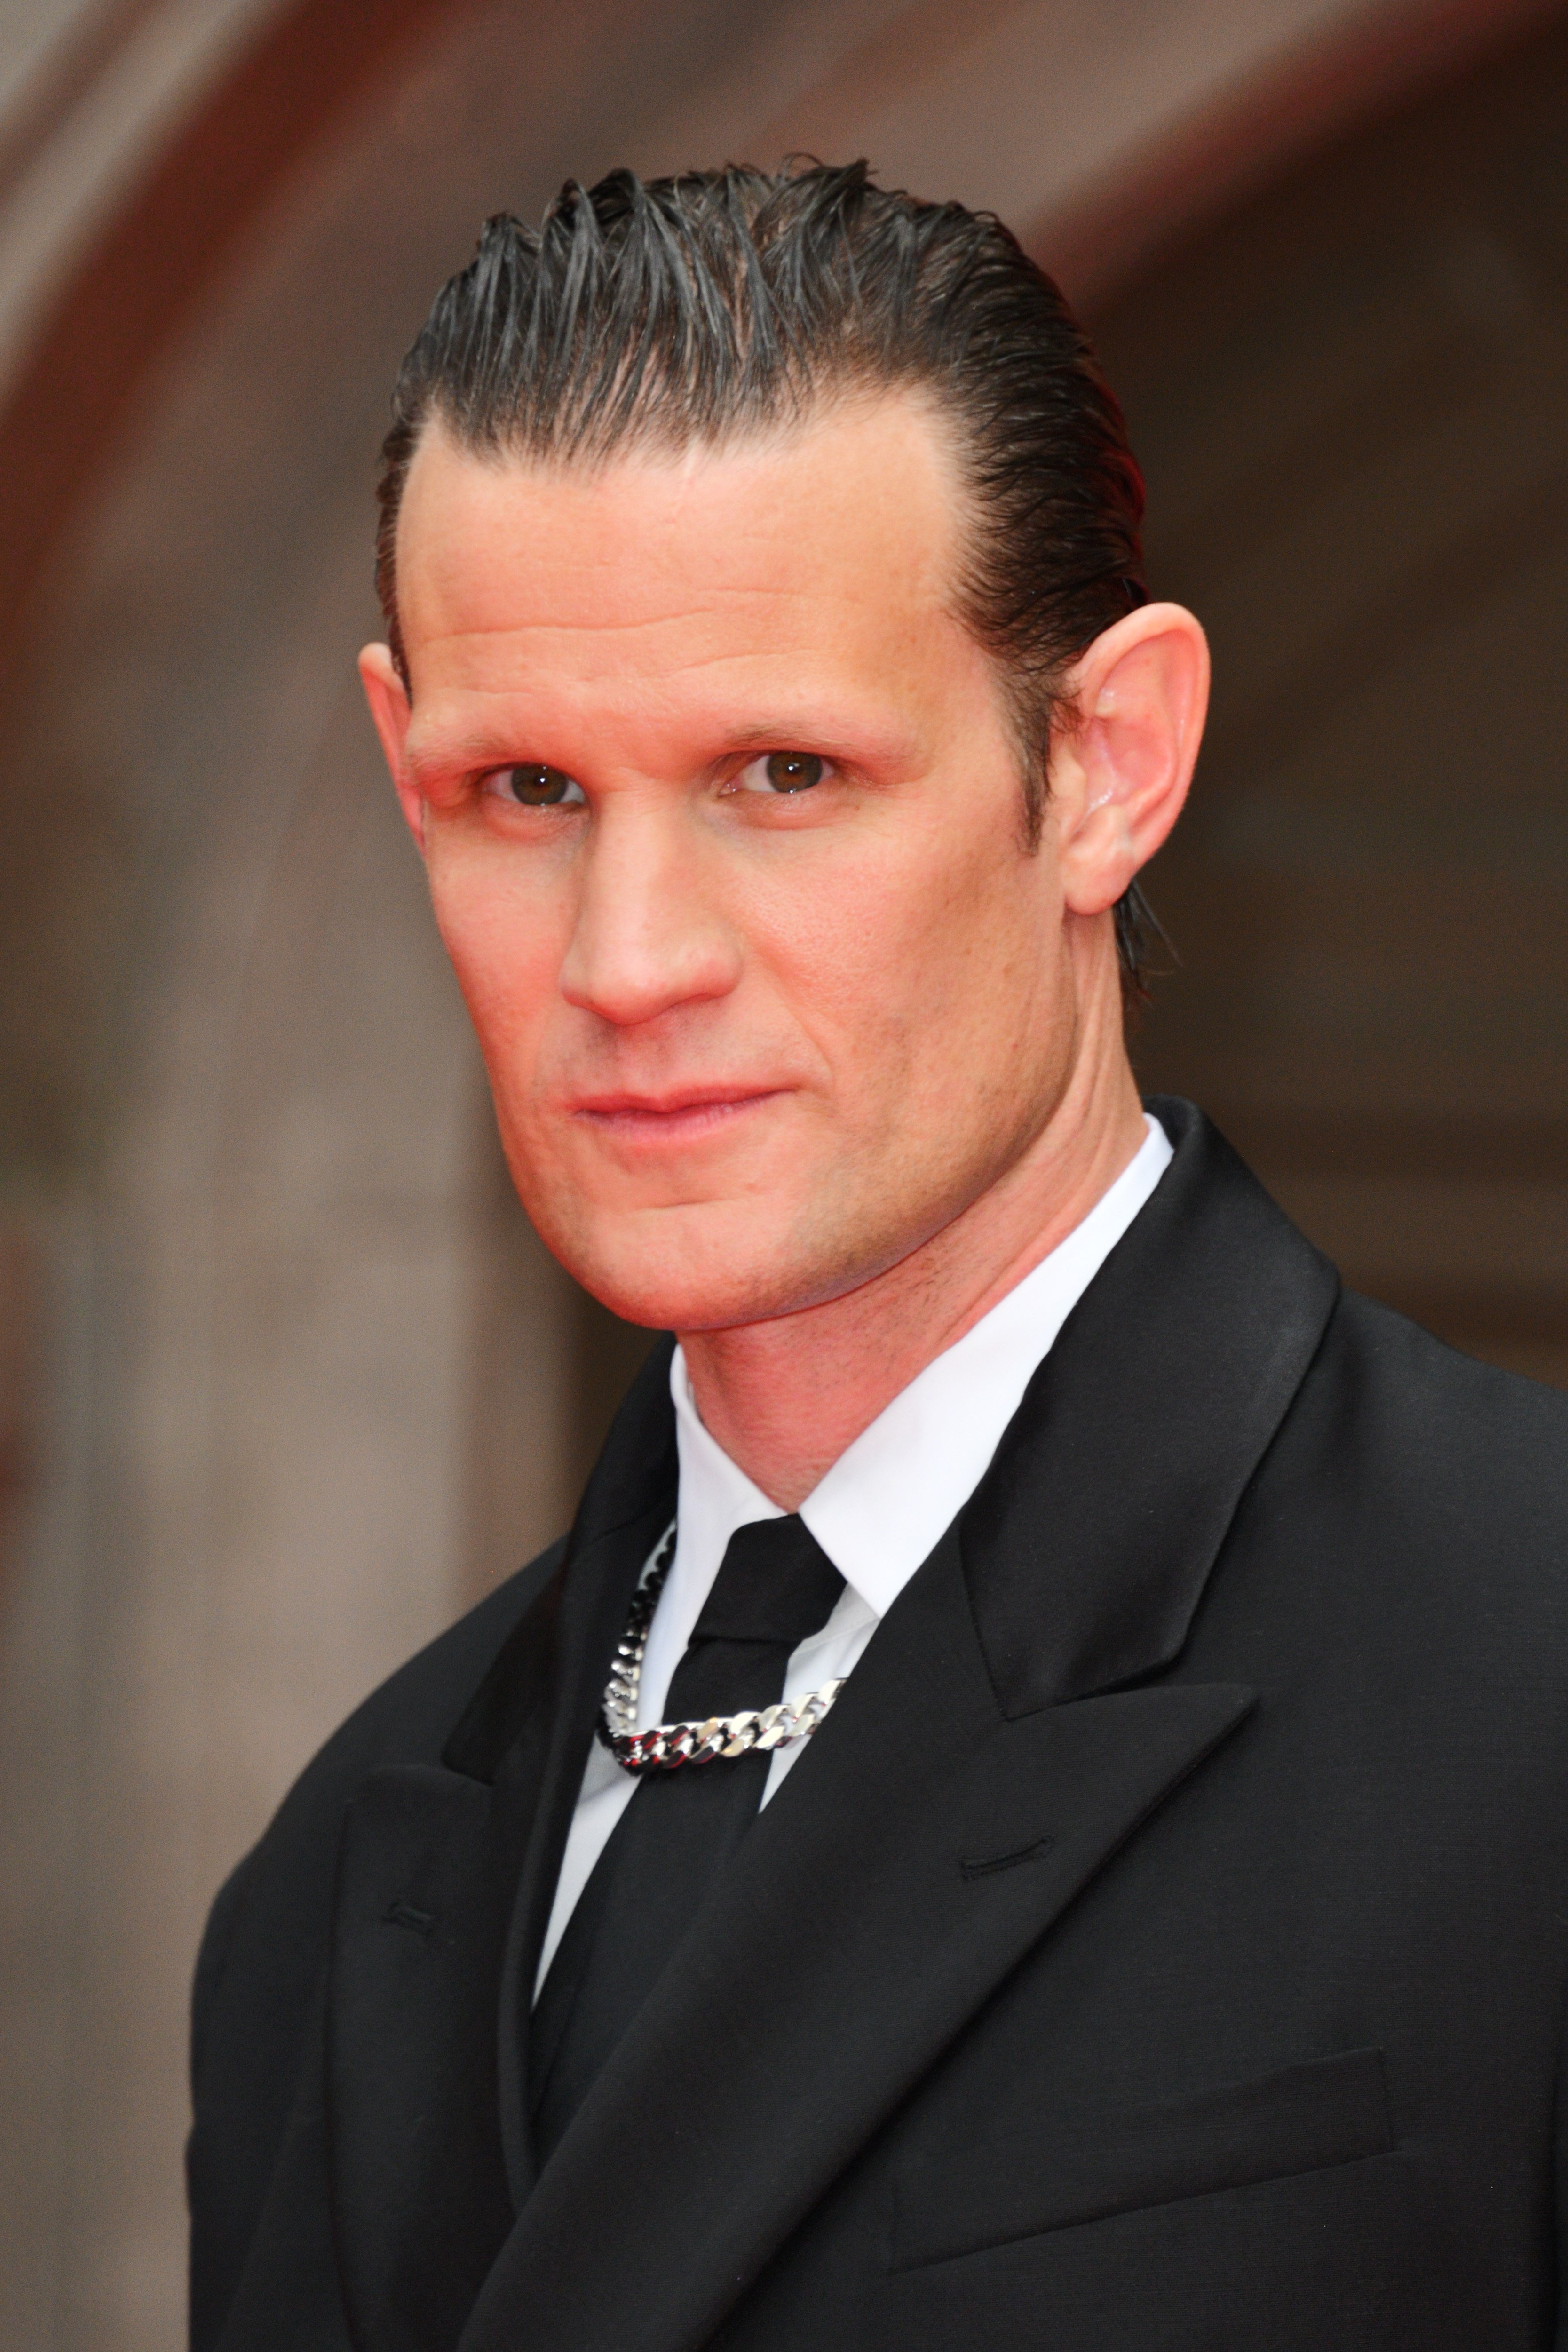 Matt Smith at the London premiere of "House of the Dragon" on August 15, 2022 | Source: Getty Images